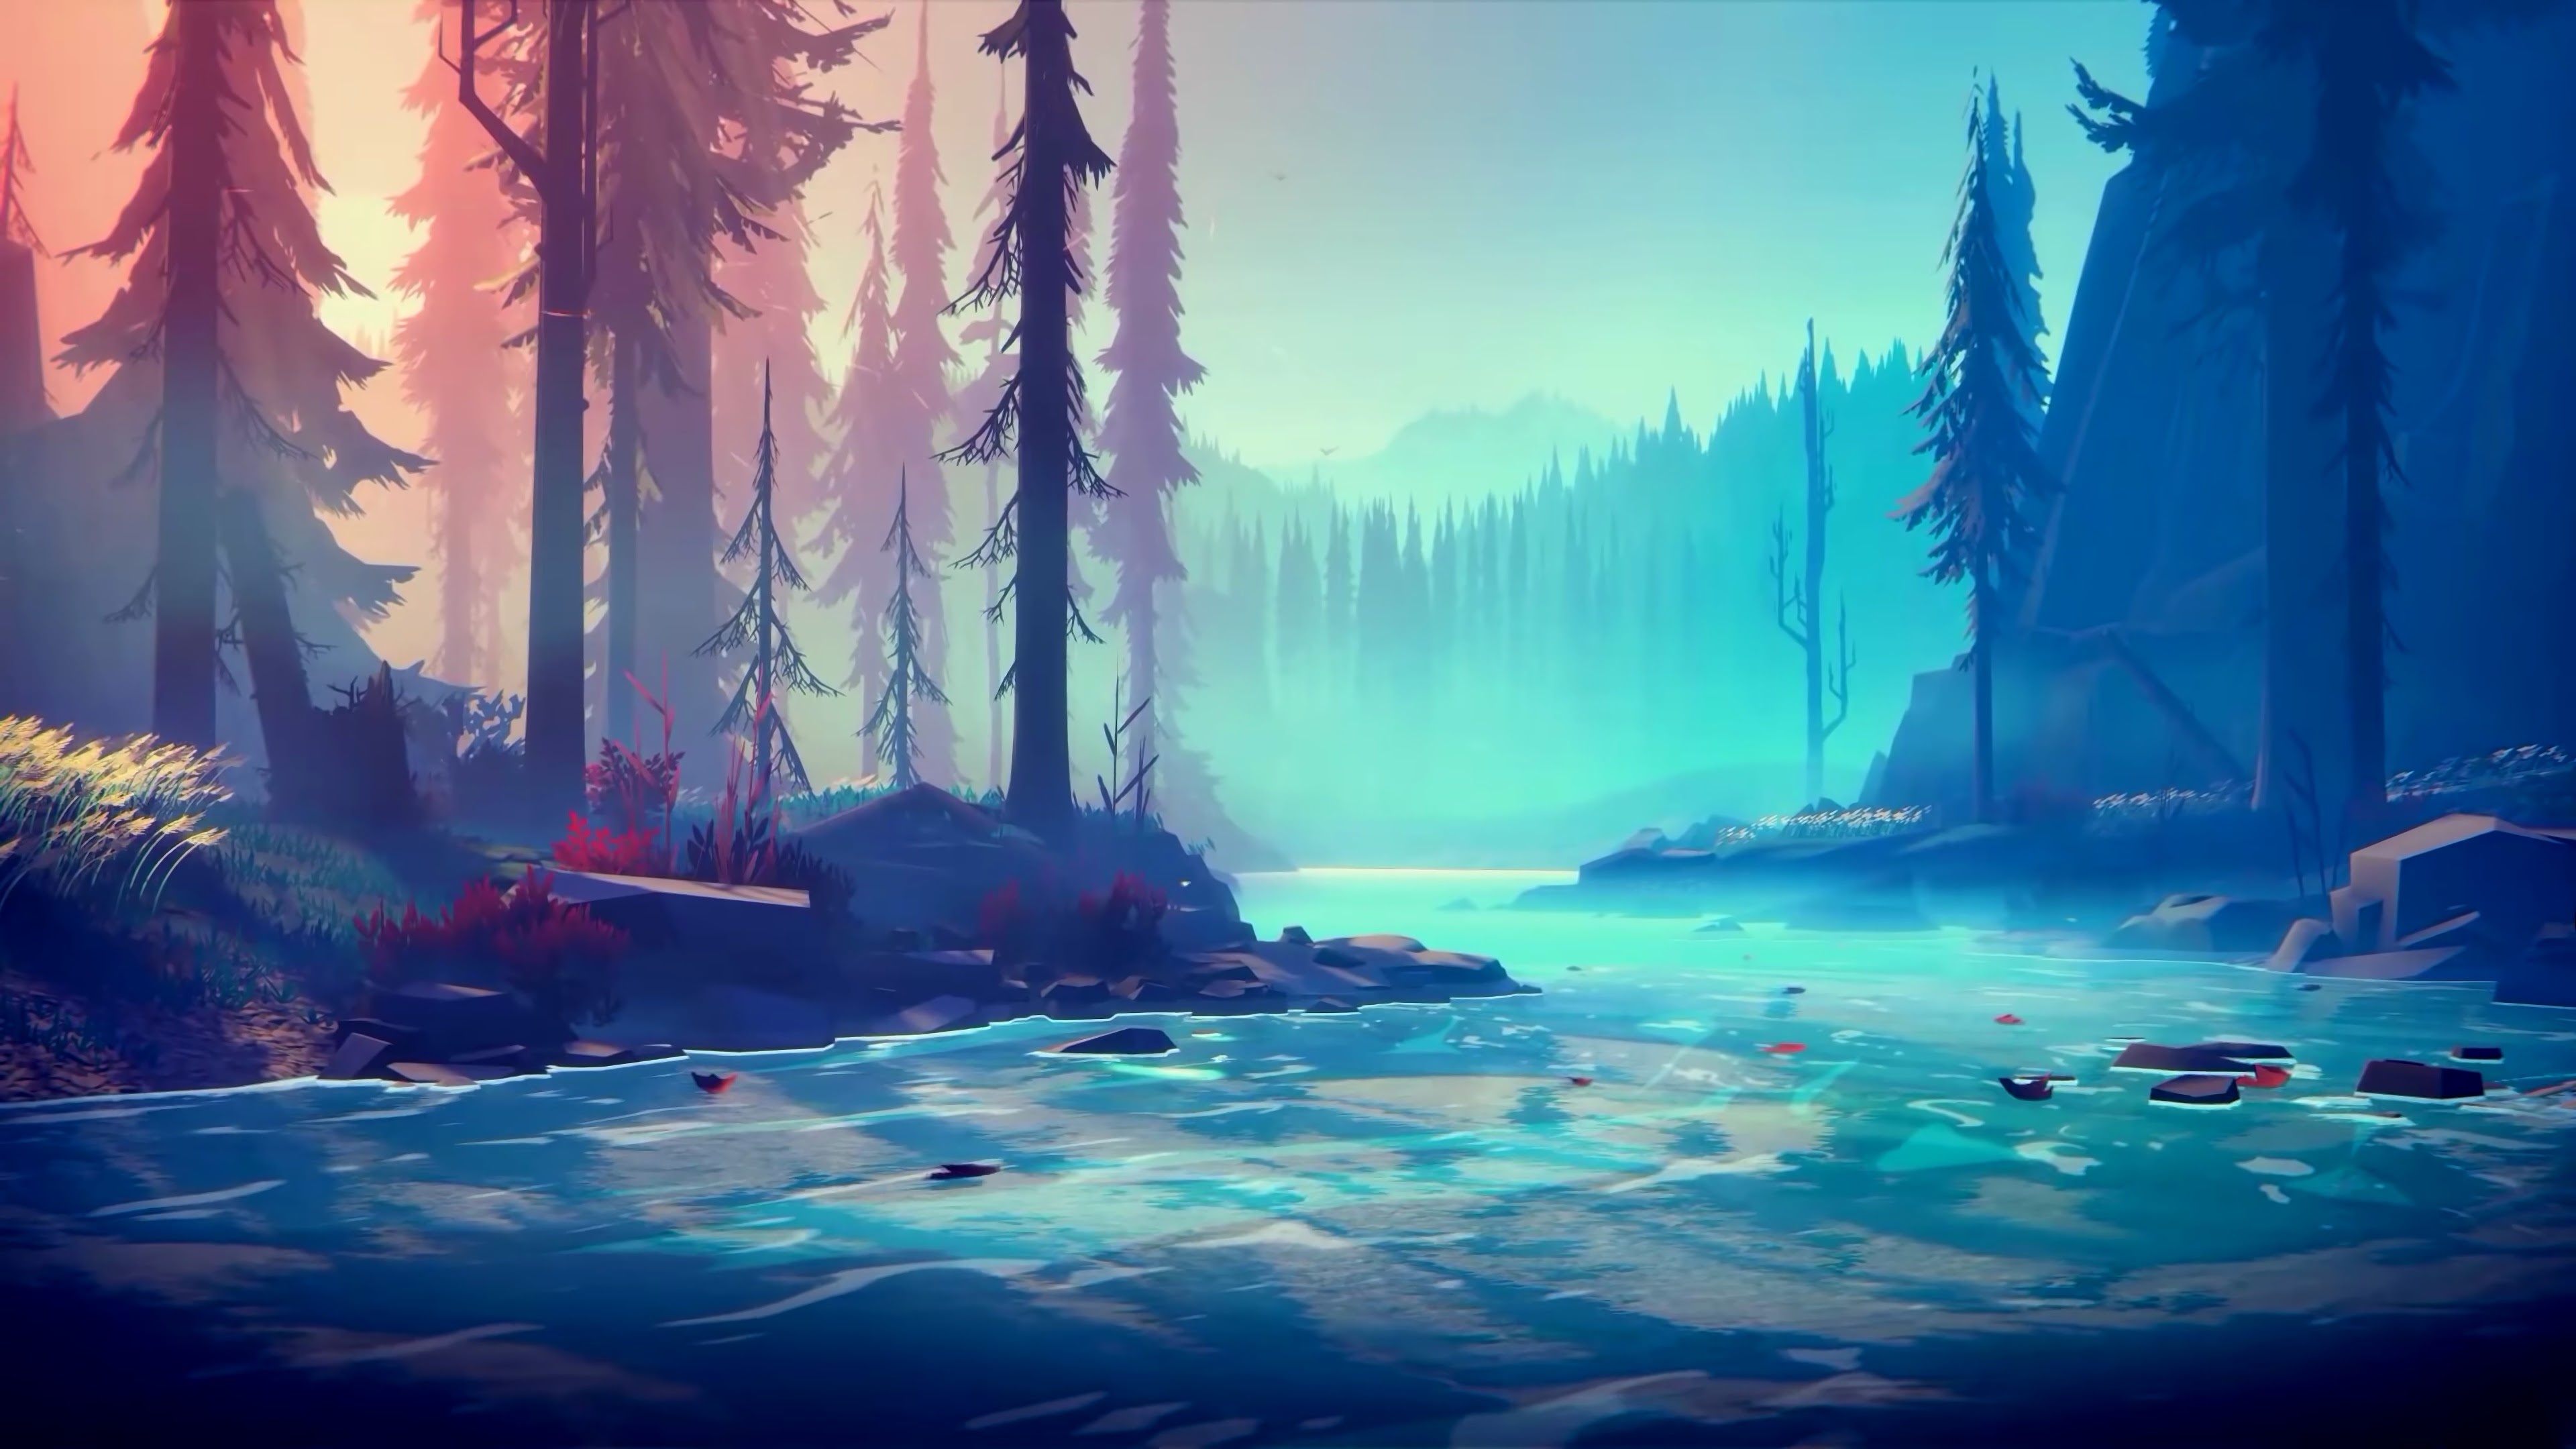 Among Trees Video Game Art Forest Trees River Mist Landscape Nature Mikael Gustafsson Illustration D 3840x2160